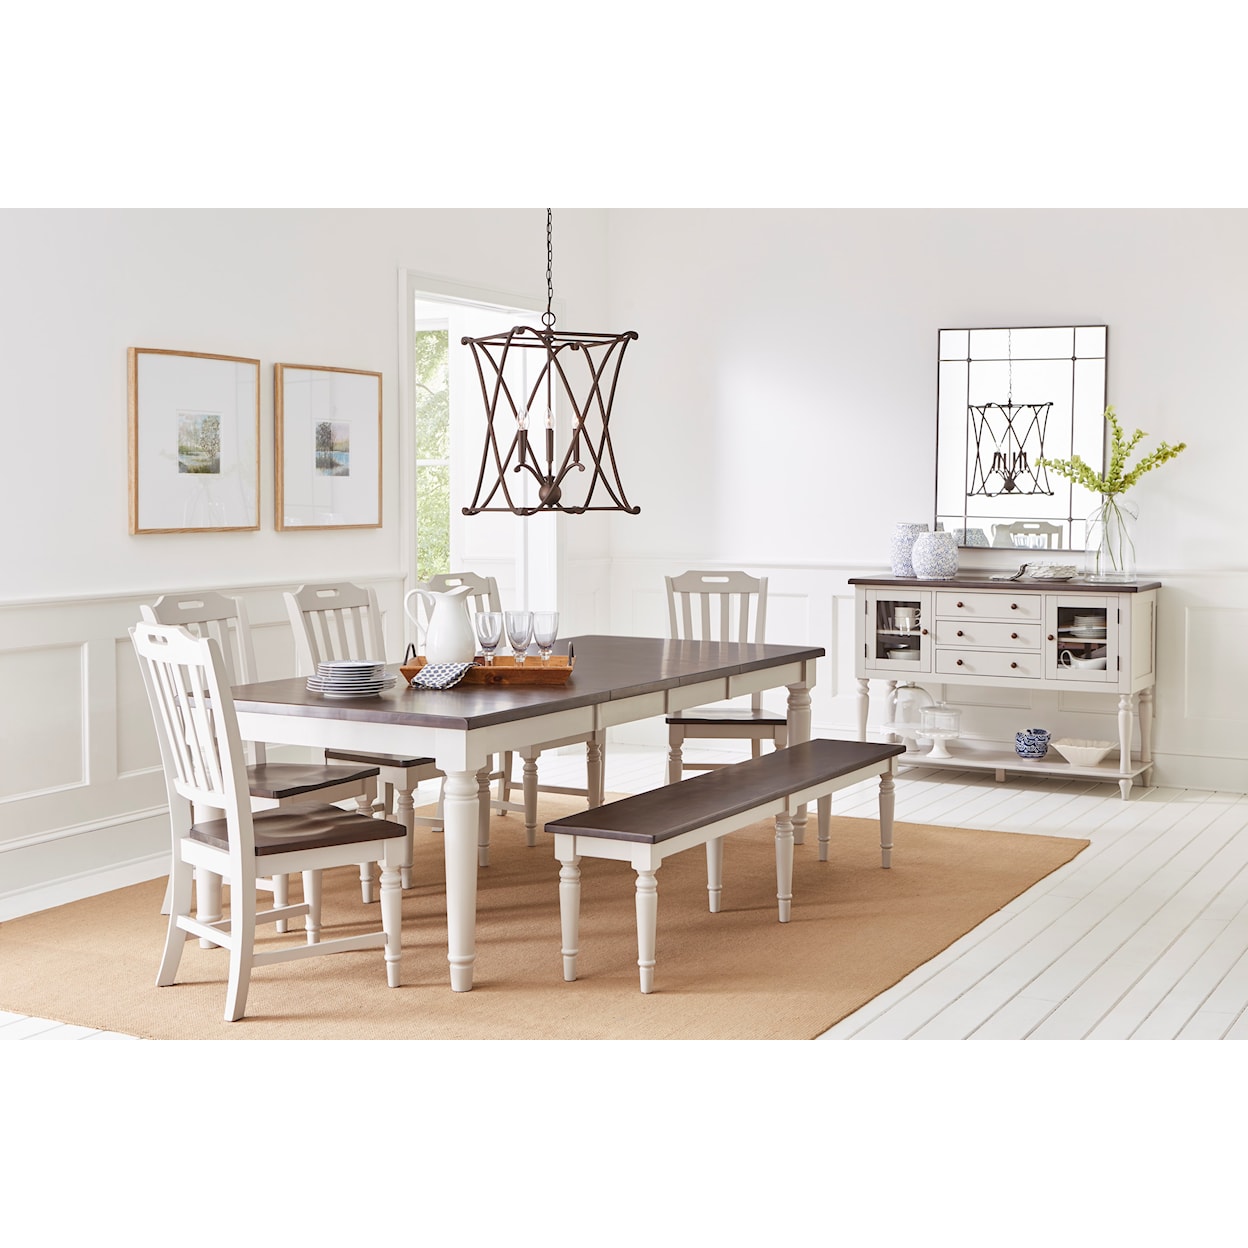 Jofran Orchard Park Dining Table with 6 Chairs and Bench